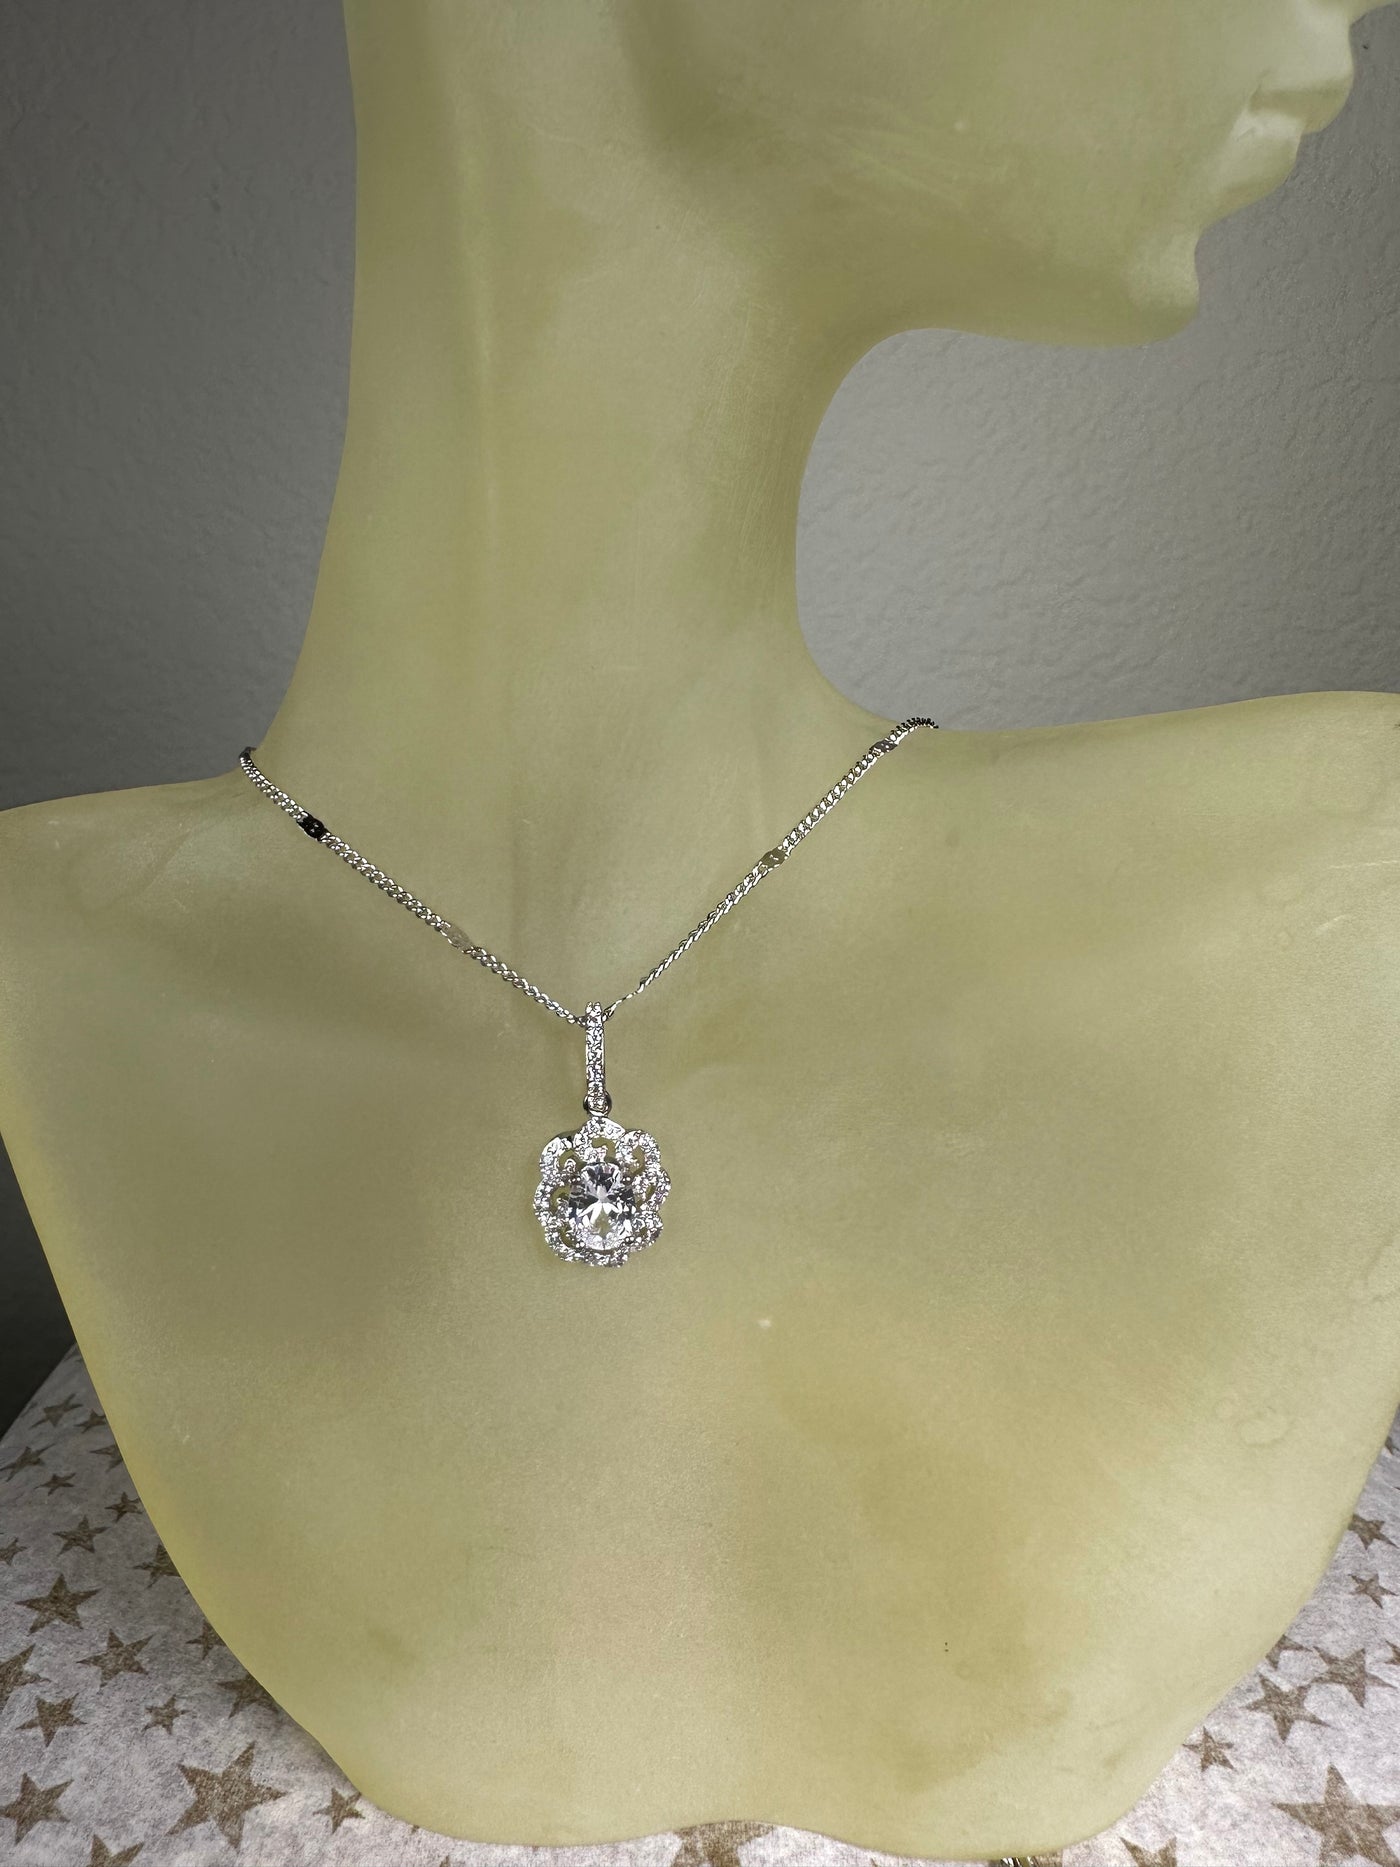 Pave Set Cubic Zirconia Floral Pendant Necklace in Silver Tone